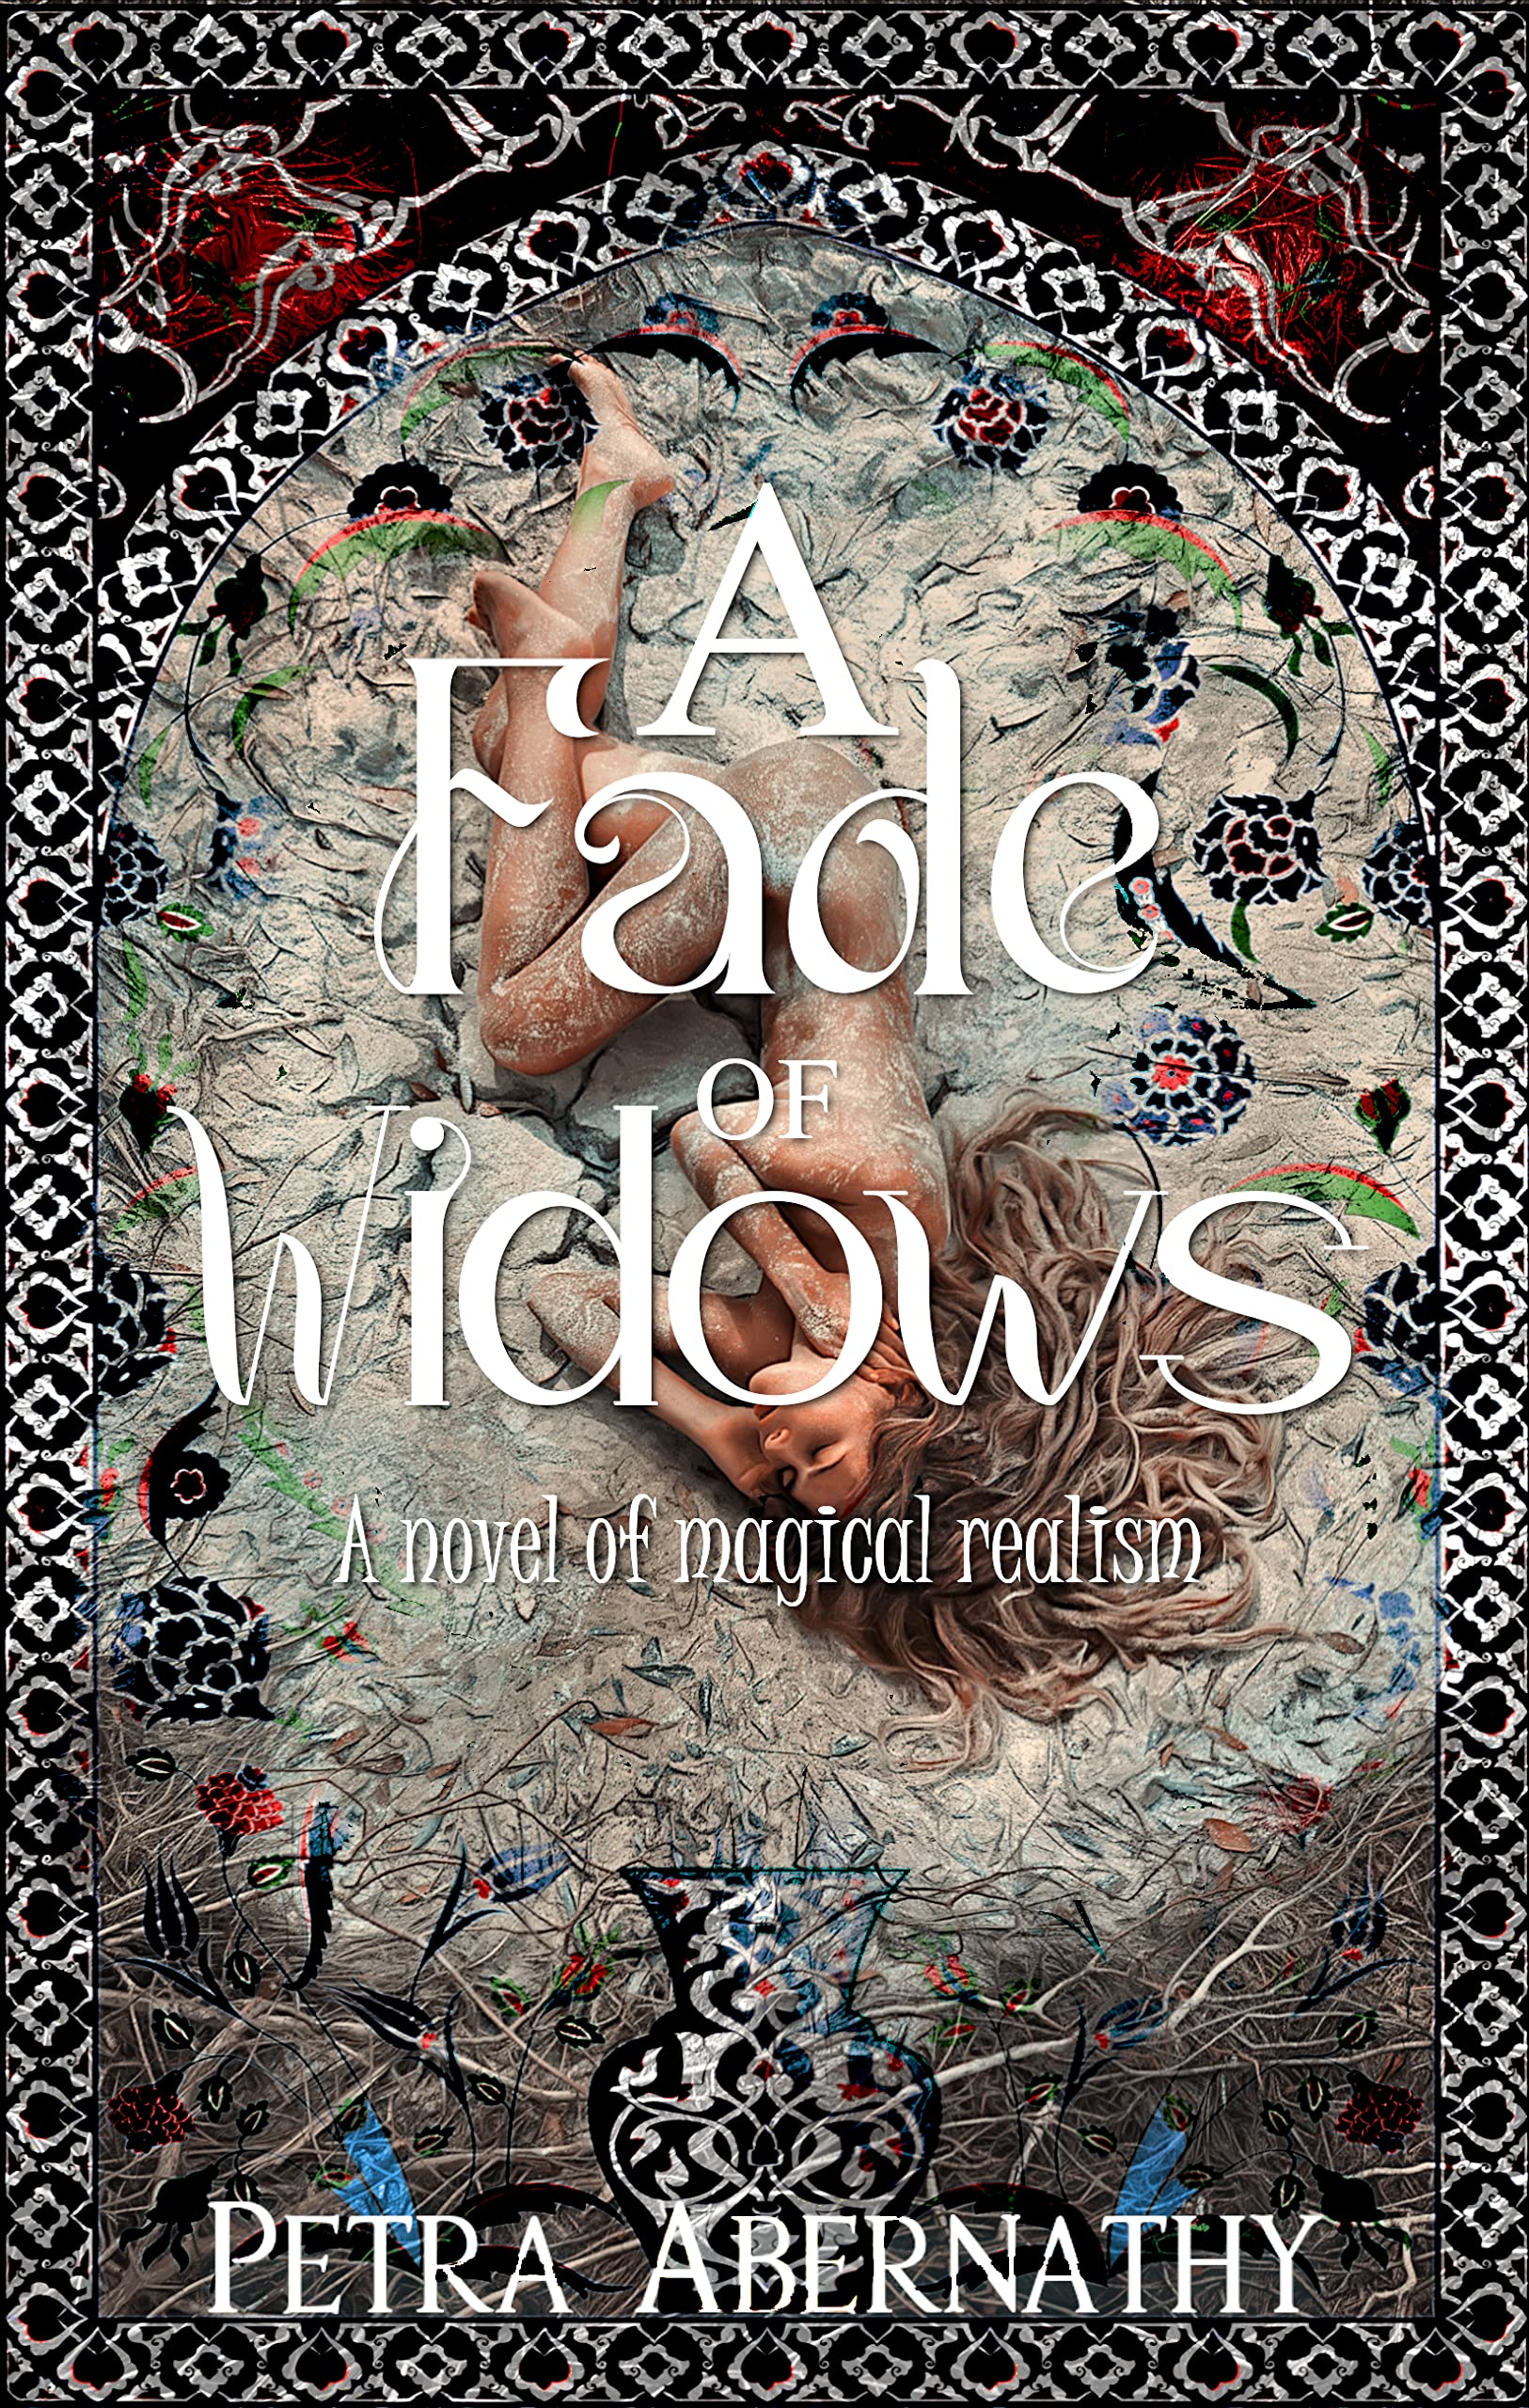 Paperback - Like New
A Fade of Widows: A novel of magical realism

Petra Abernathy

Ours is a lineage of widows, generations of us and our uncanny talents fading away because we lost the love of our lives too soon.

Since he died I have used what magic I have left to create healing rooms for troubled souls. My daughter, Phaedra, crafts fragile ceramic moon jars that salve the wounds of all who own them.

We fade beautifully, Phaedra and I, achingly talented, hamstrung by our grief.

Then my father dies, and my mother doesn't fade. Instead she gets brighter, and our own gifts burgeon once more.

That terrifies me. It means I might not be done. The fade may not be inevitable. We might love again and bloom again.

For Phaedra another love is something she is oblivious to. For my mother it is the expected response to her beauty and glamour. For me it is the font of all guilt.

A Fade of Widows is a fantastical magical realism novel of lost love, the kind of magic that passes down the generations, and the twists in our heritage that make us what we are. From the enchanting waves of the Irish sea to the fairy chimneys of Cappadocia in Turkey it will take you on a mystical journey of grief and growth. Perfect for fans of Alice Hoffman and Joanne Harris.